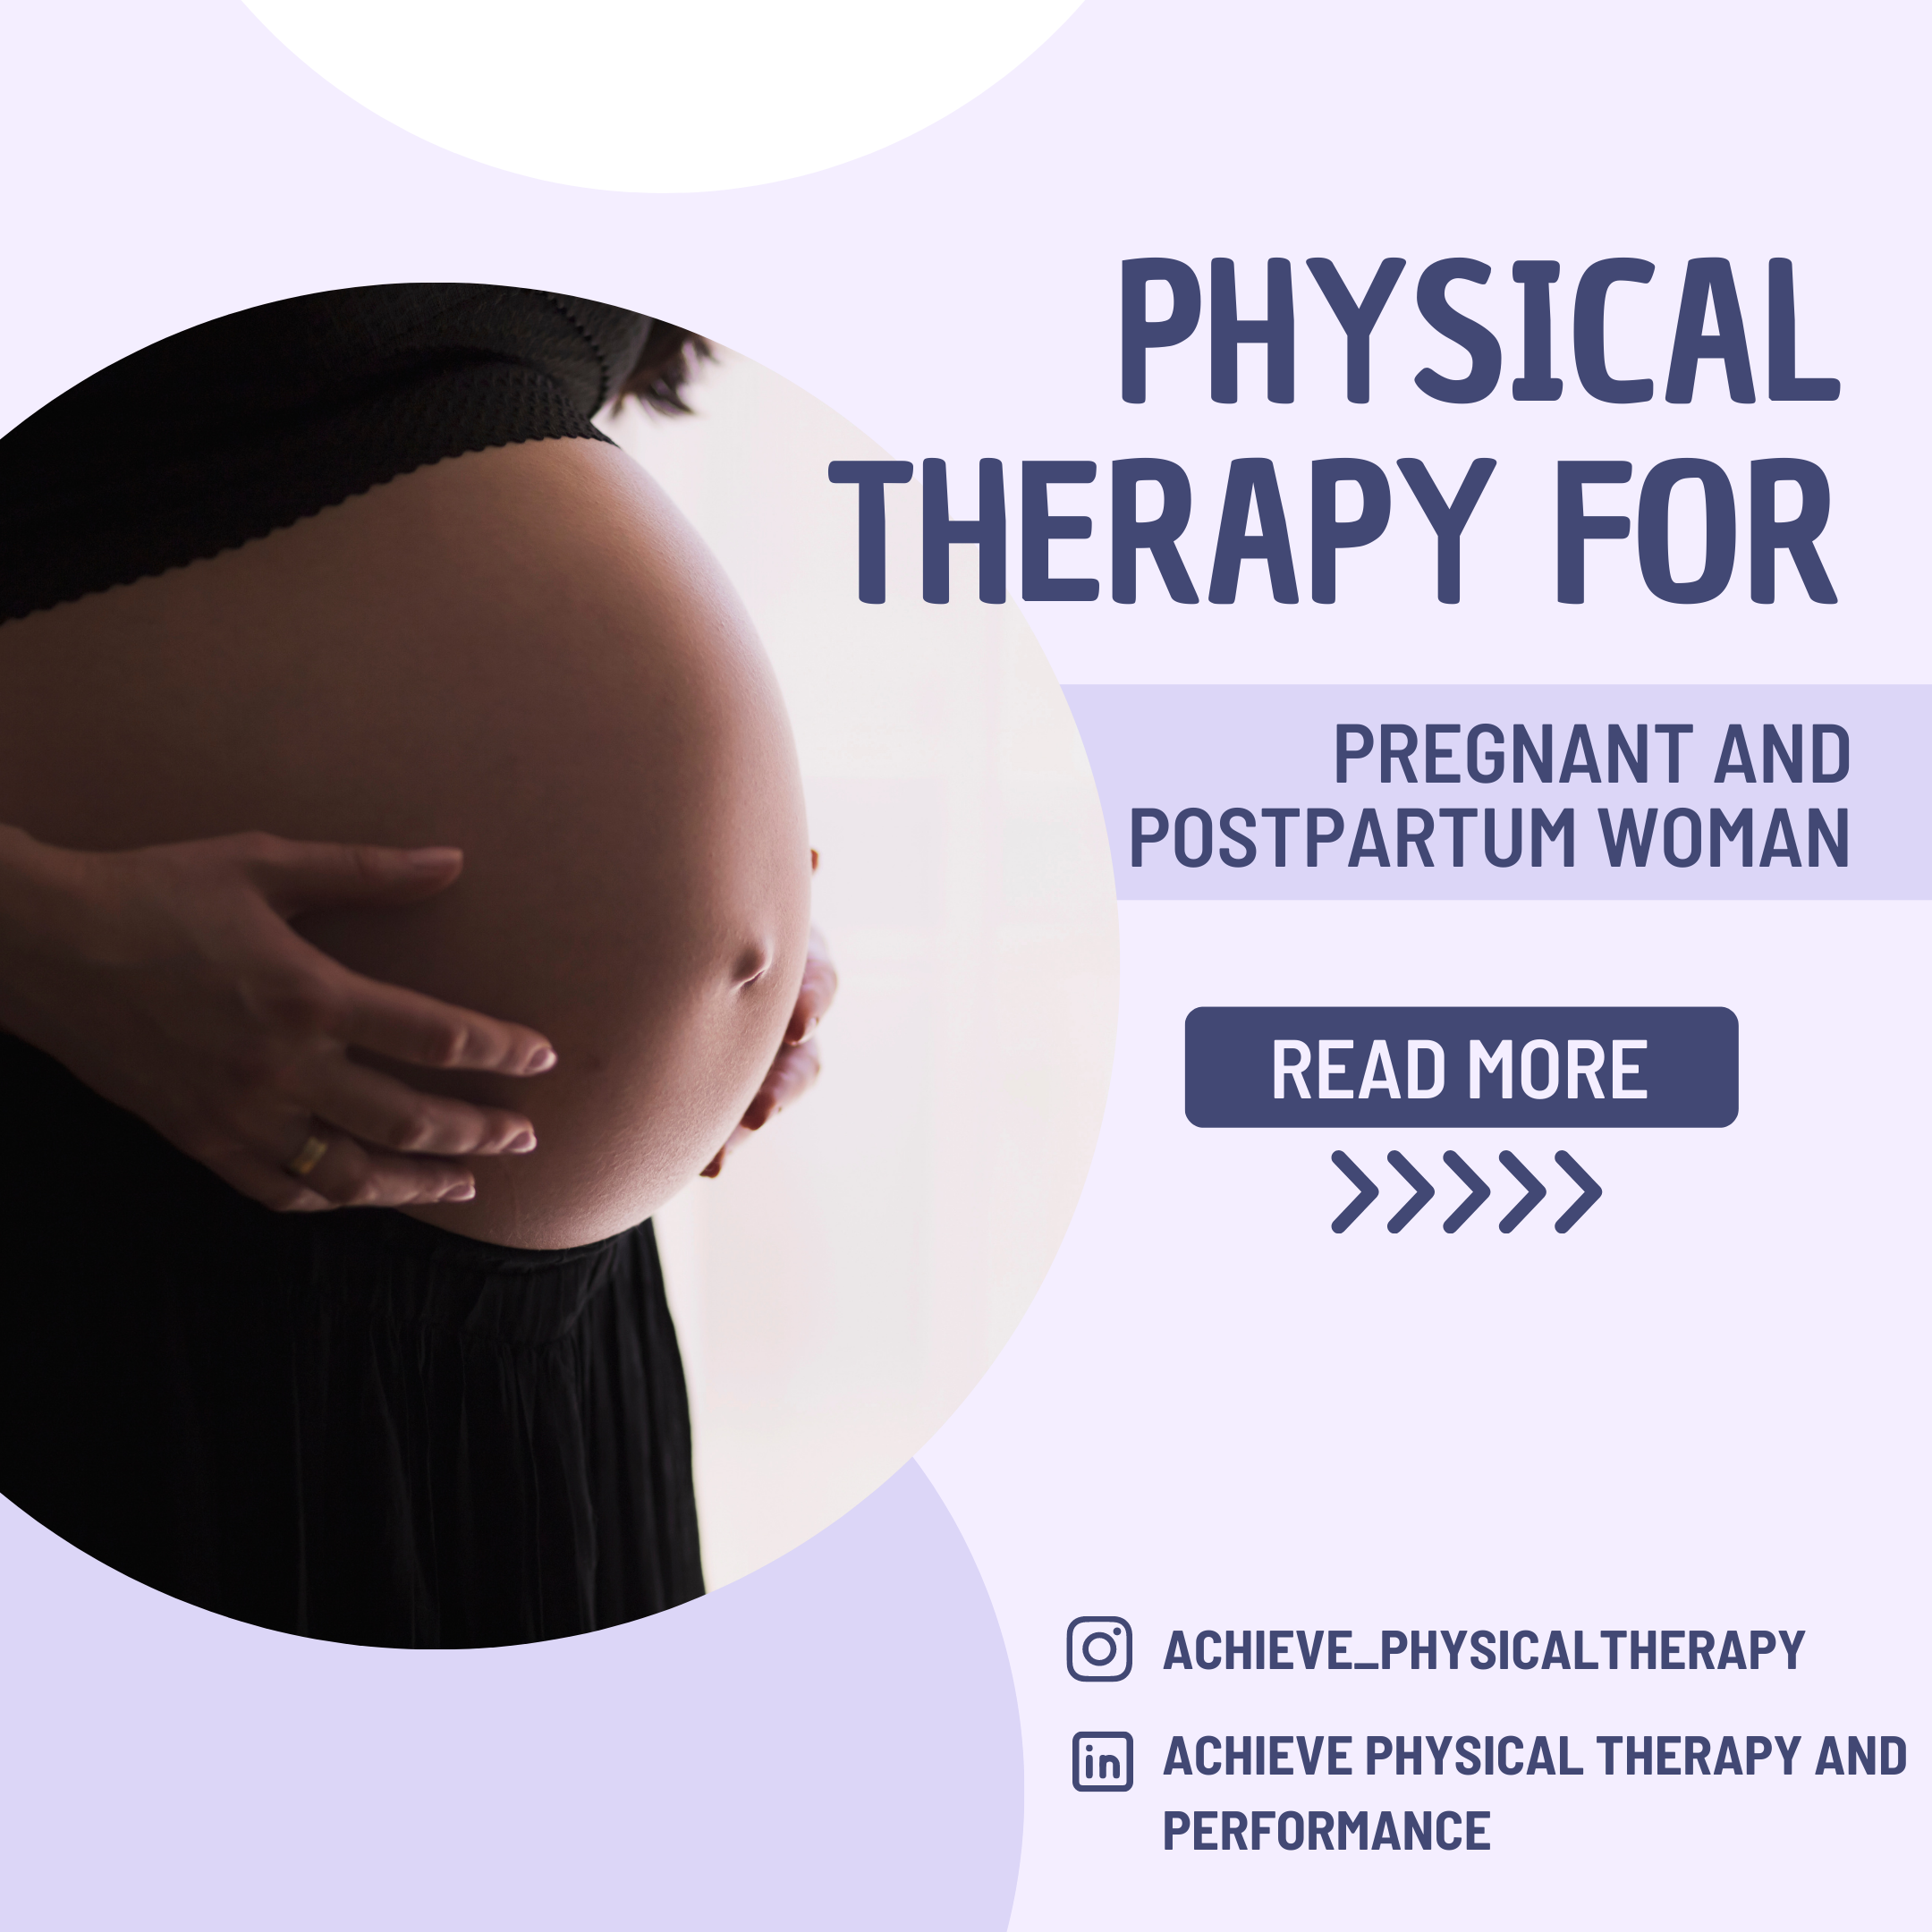 Physical therapy for pregnant women and postpartum